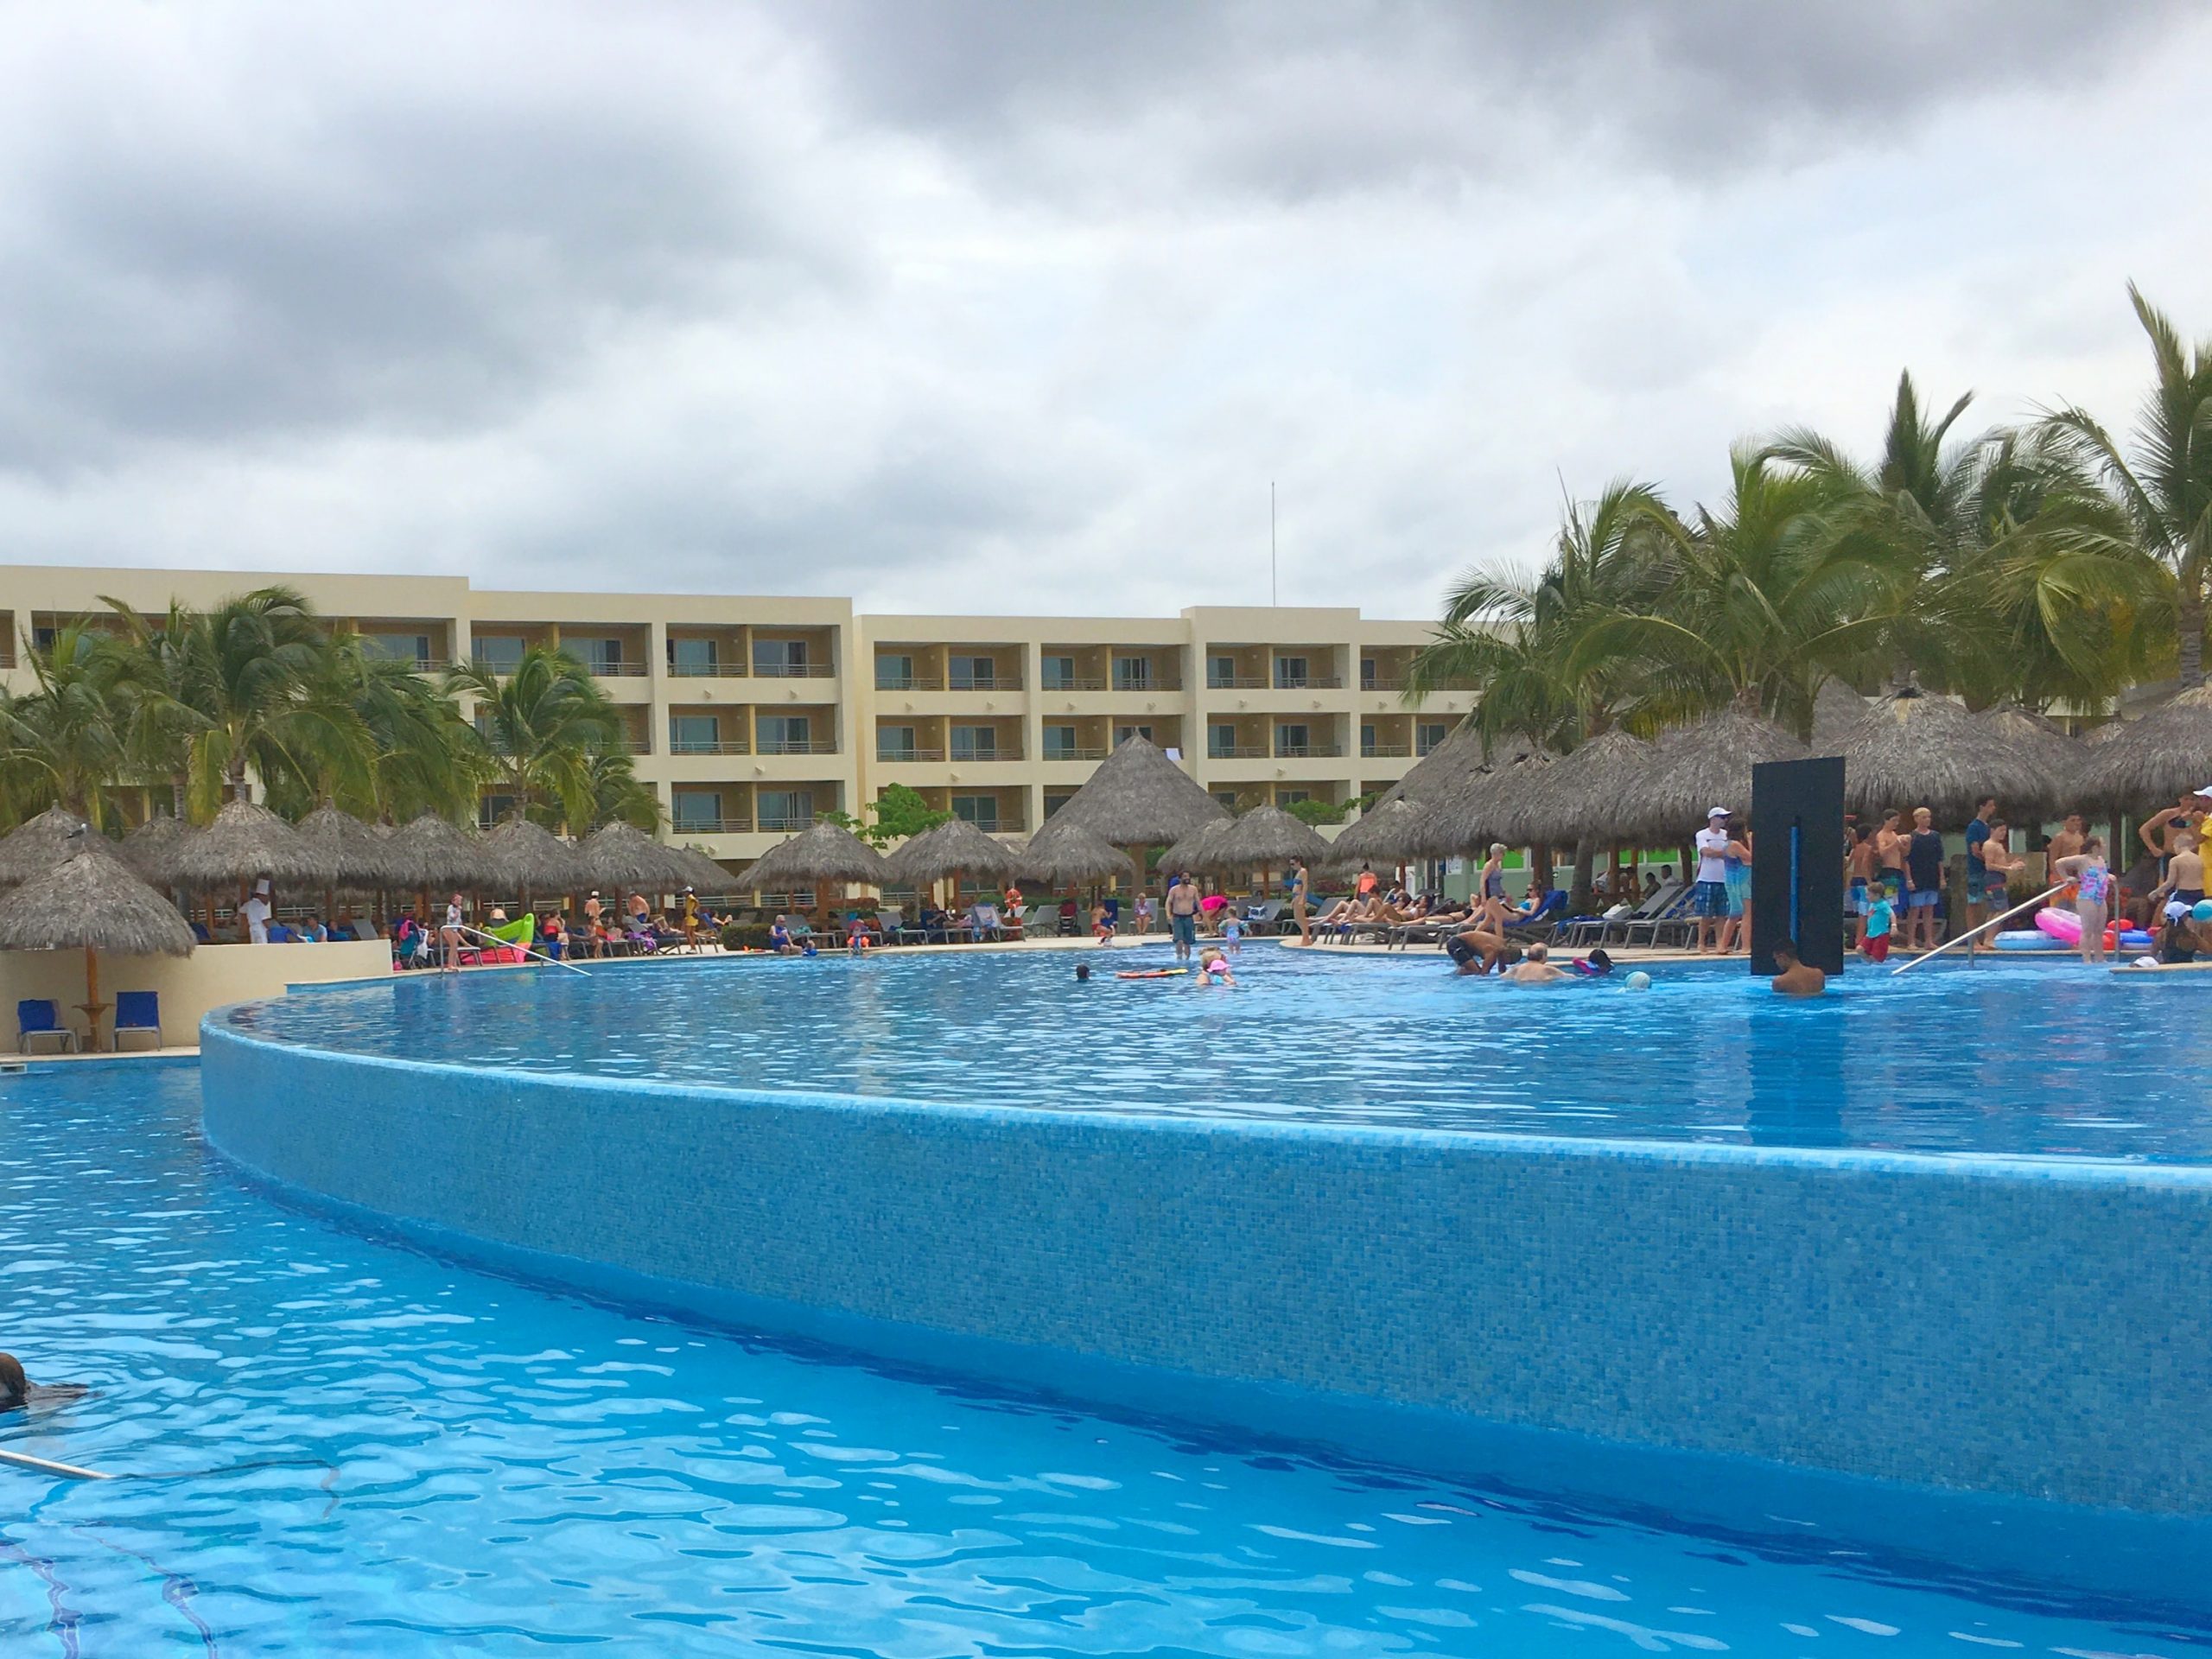 main pool area with infinity pool and beach loungers and guests swimming in the water